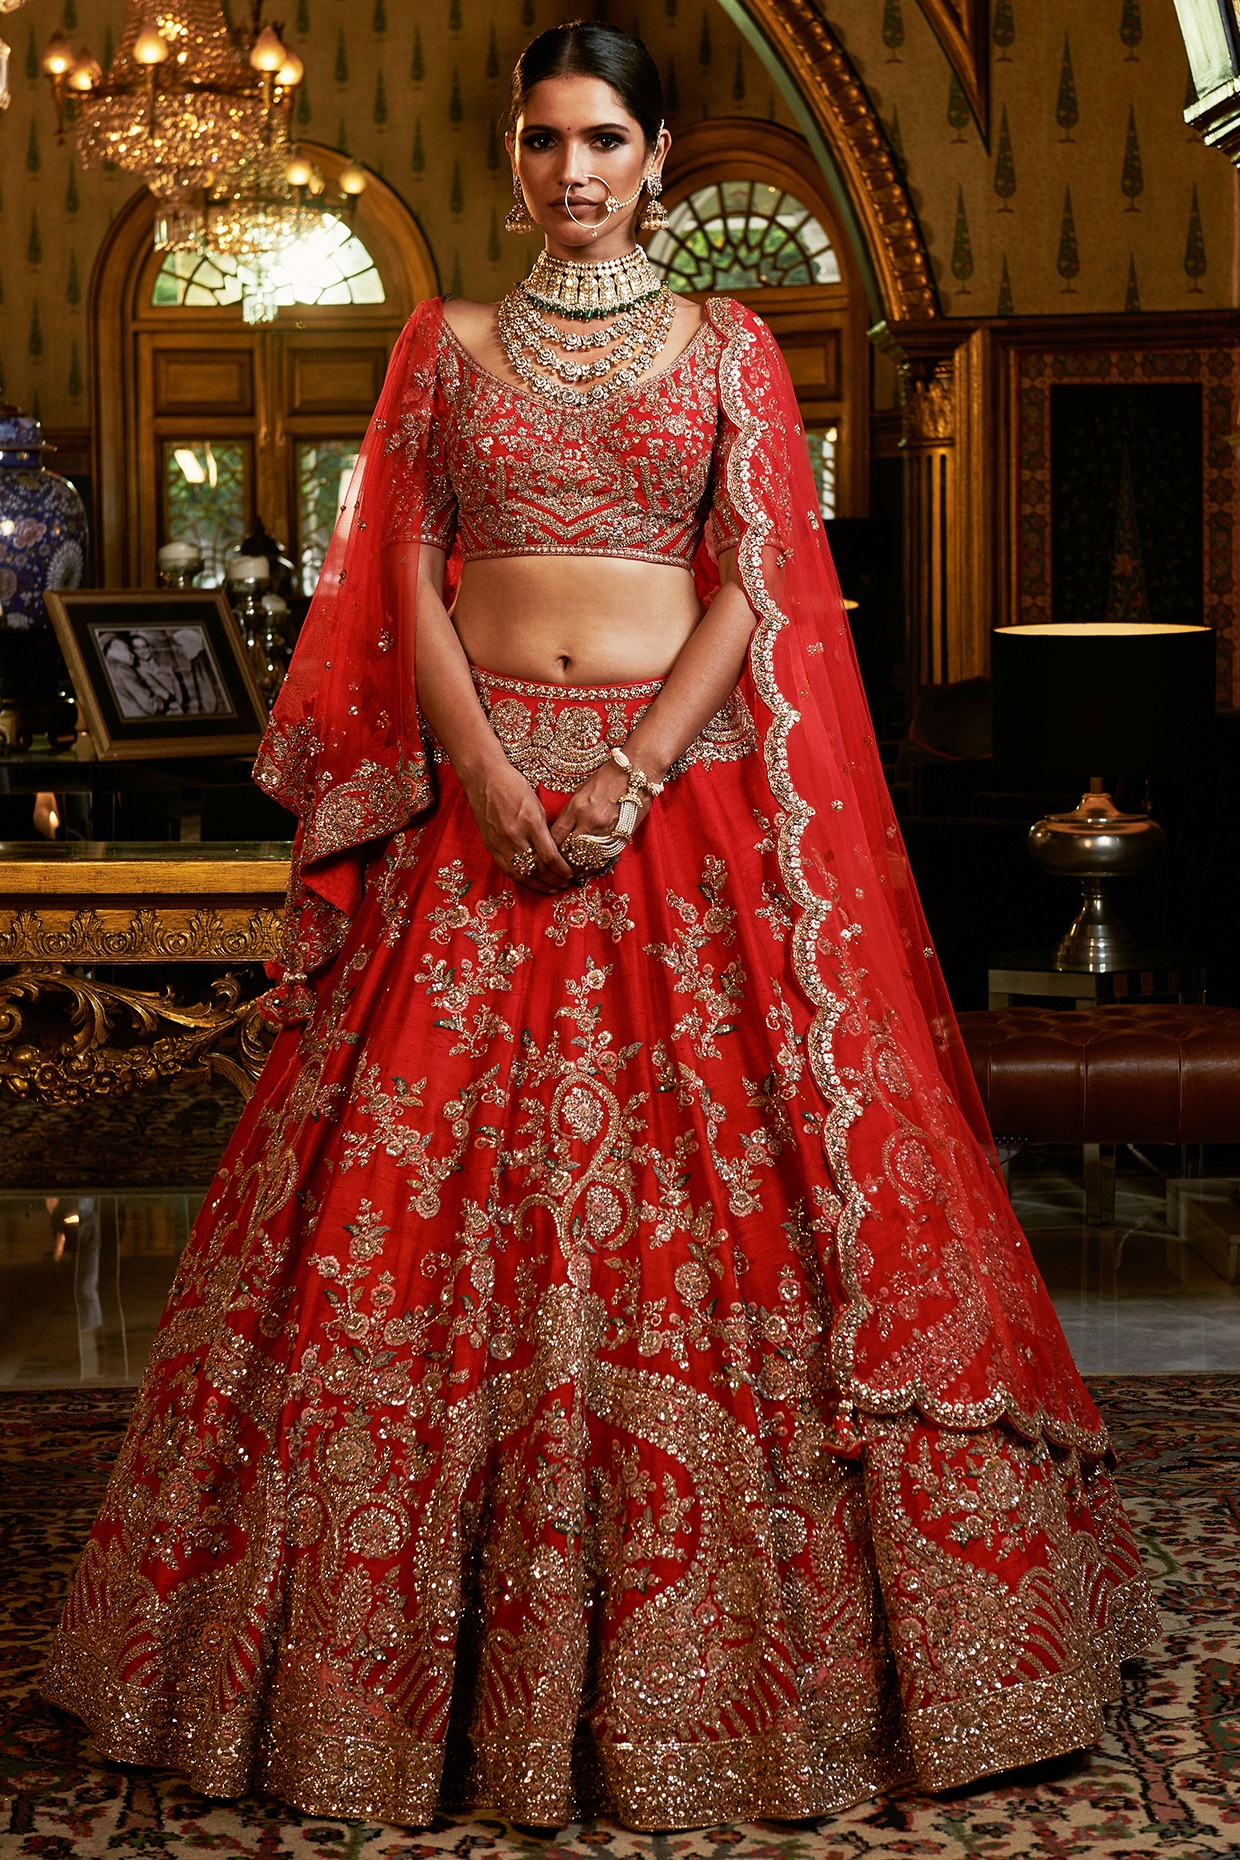 Double Dupattas Draped on Lehengas Are Here to Steal Your Heart